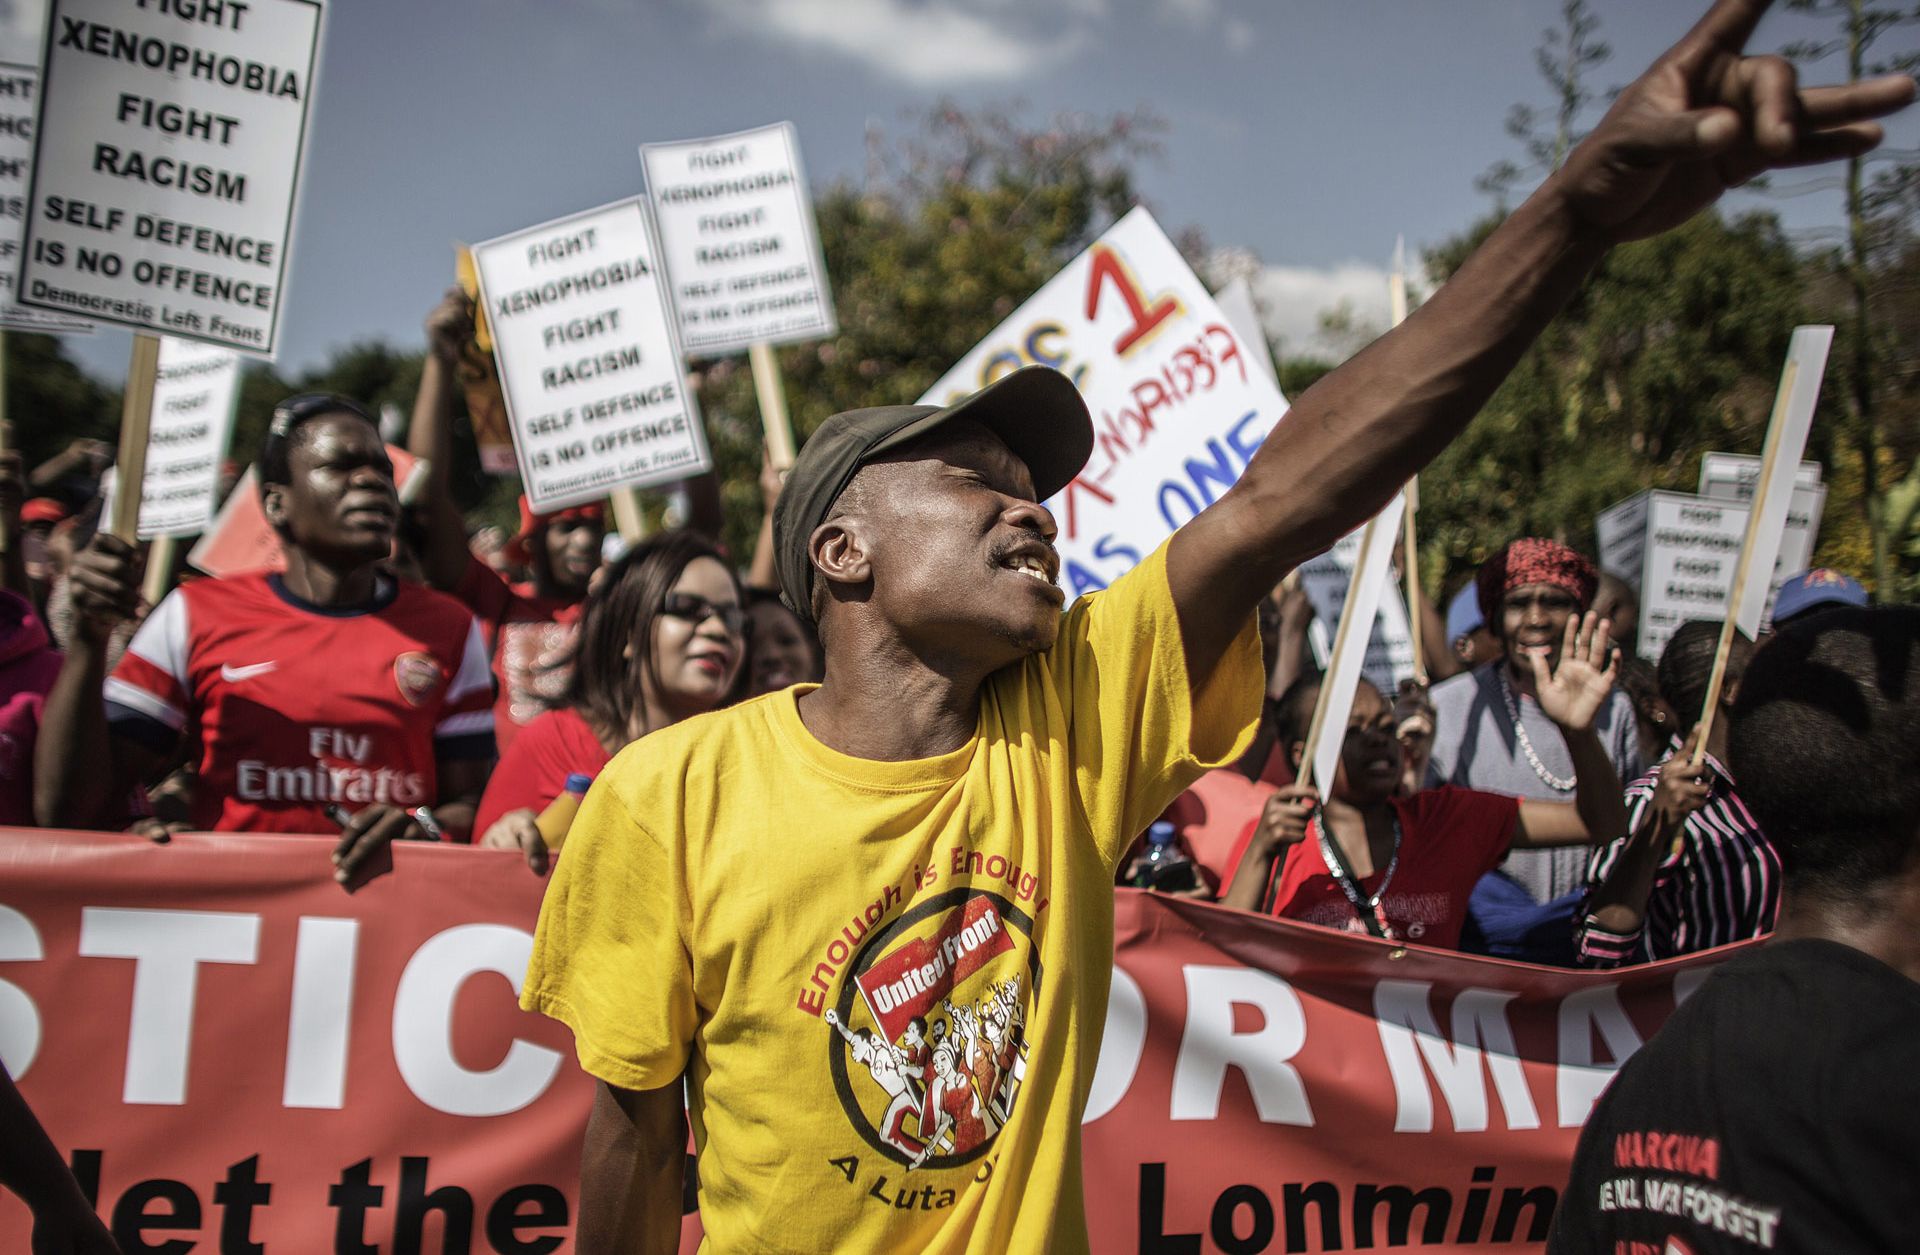 Xenophobic Violence in South Africa: The Government's Measured Response